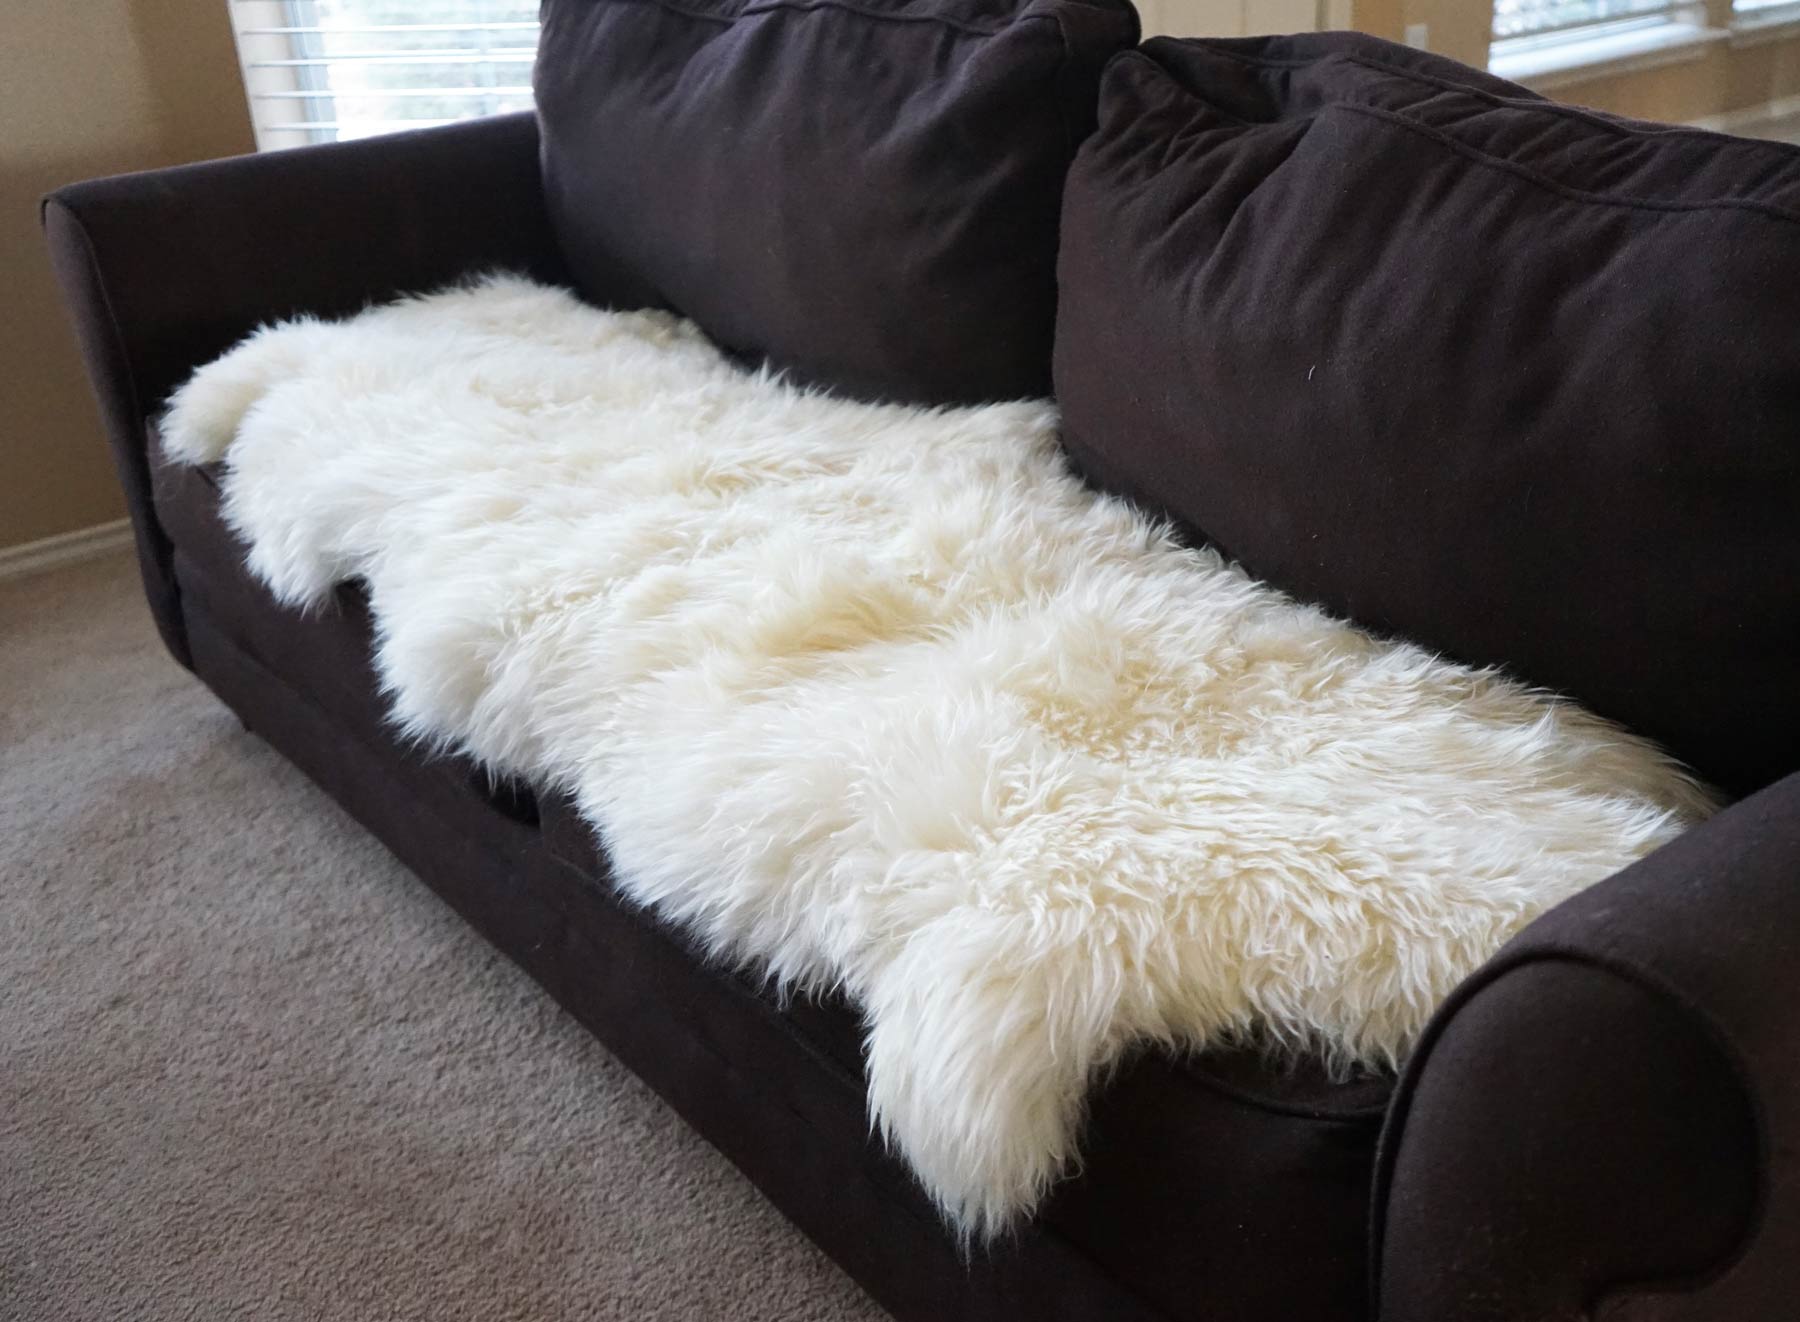 Authentic Australia Sheepskin 100% fur ivory home decoration carpet rug 2.8x6ft - Rodeo Cowhide Rugs